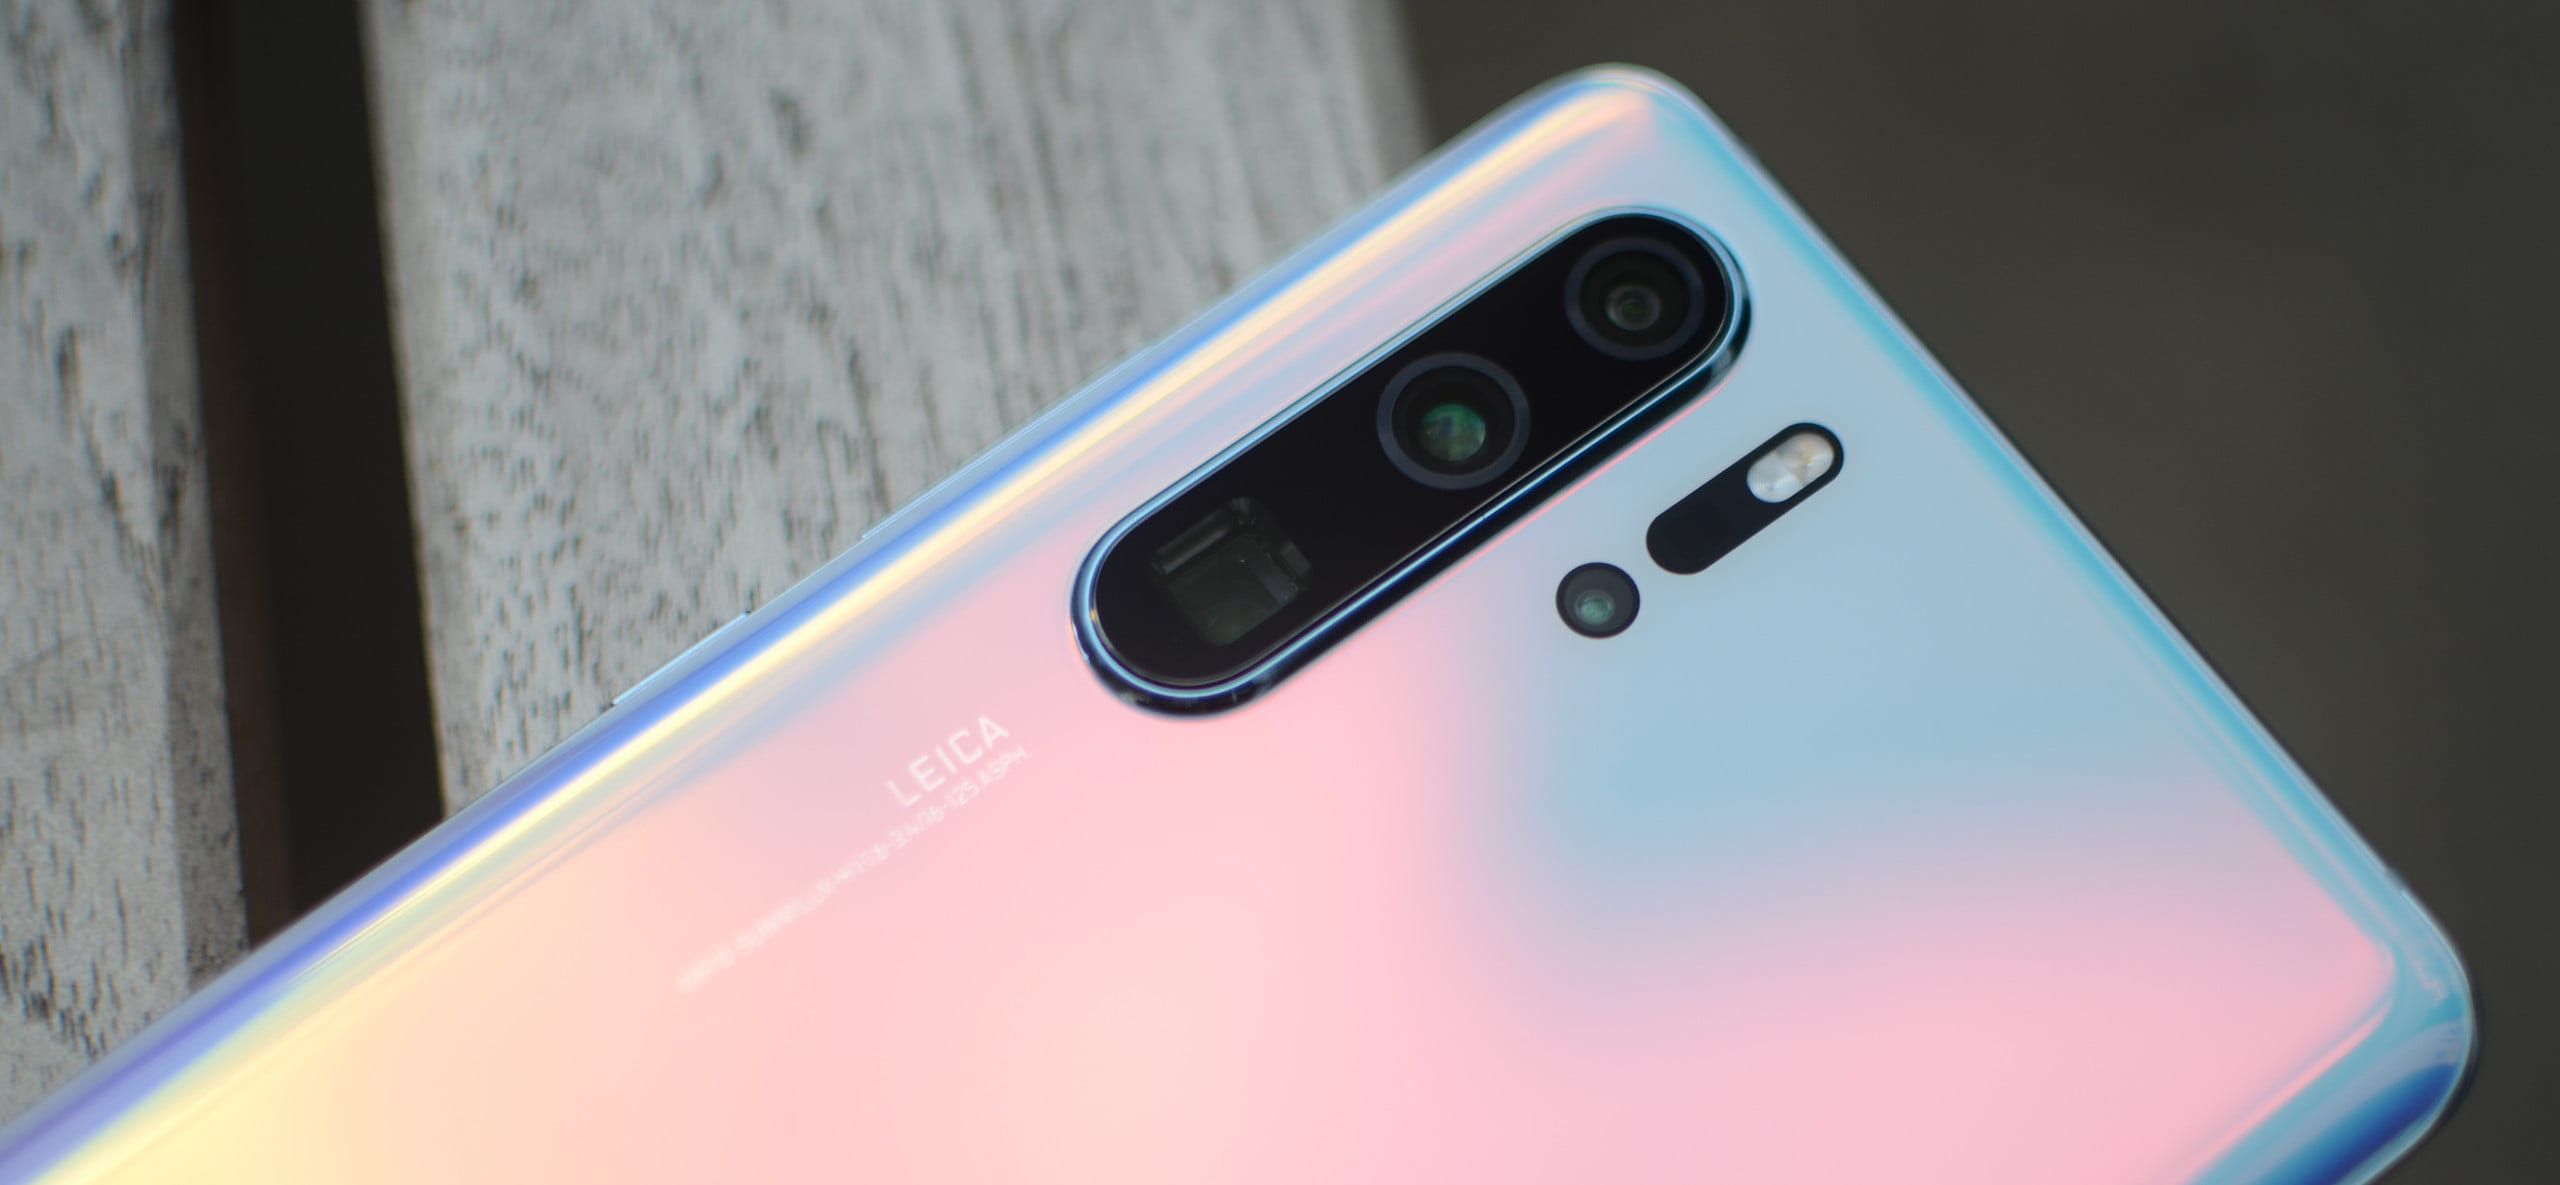 Optimized and Exclusive Snapchat Experience for Huawei P30 and P30 Pro